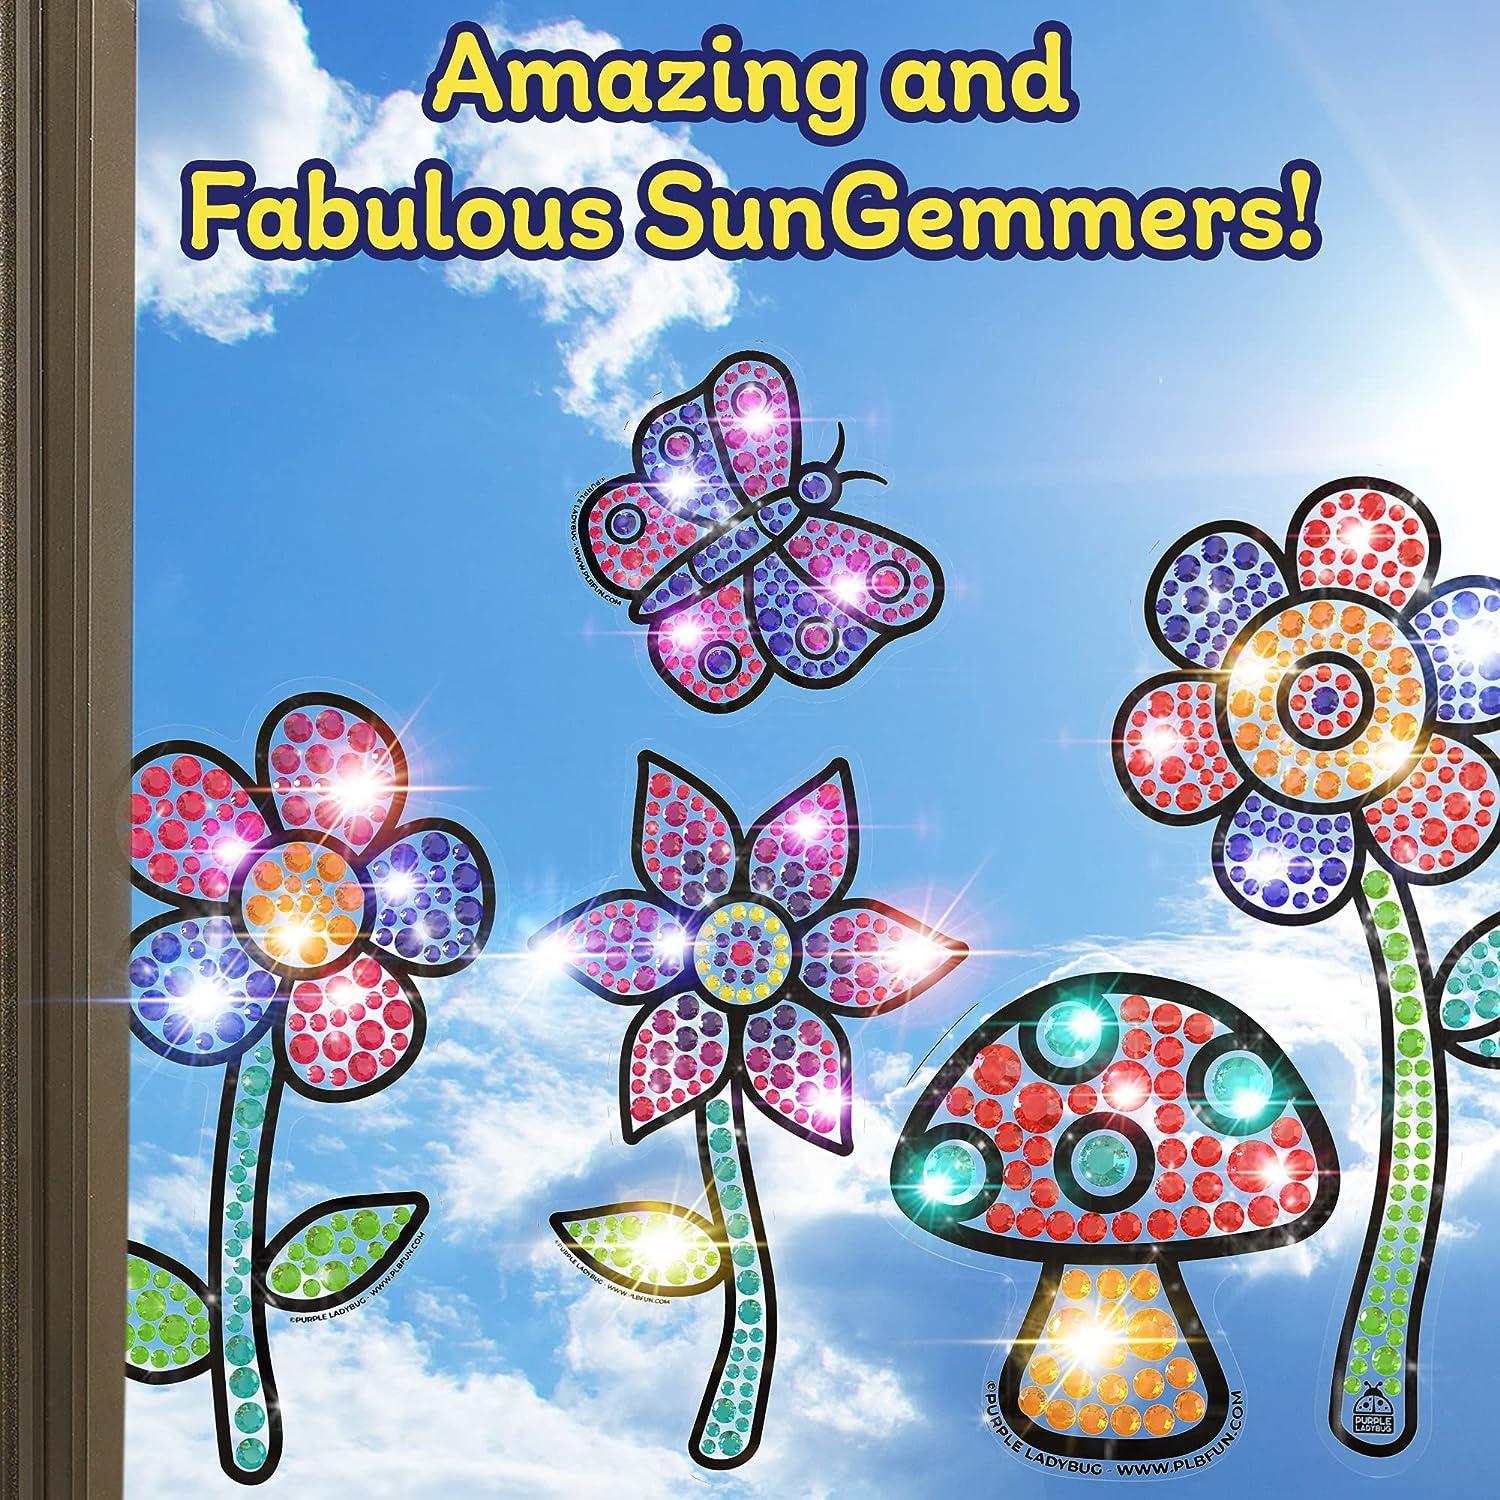 Purple Ladybug SUNGEMMERS Window Art Suncatcher Kits for Kids - Cool Gem Art Girl Craft Ages 6-8 - Great 7 Year Old Girl Gifts, Christmas Gift for